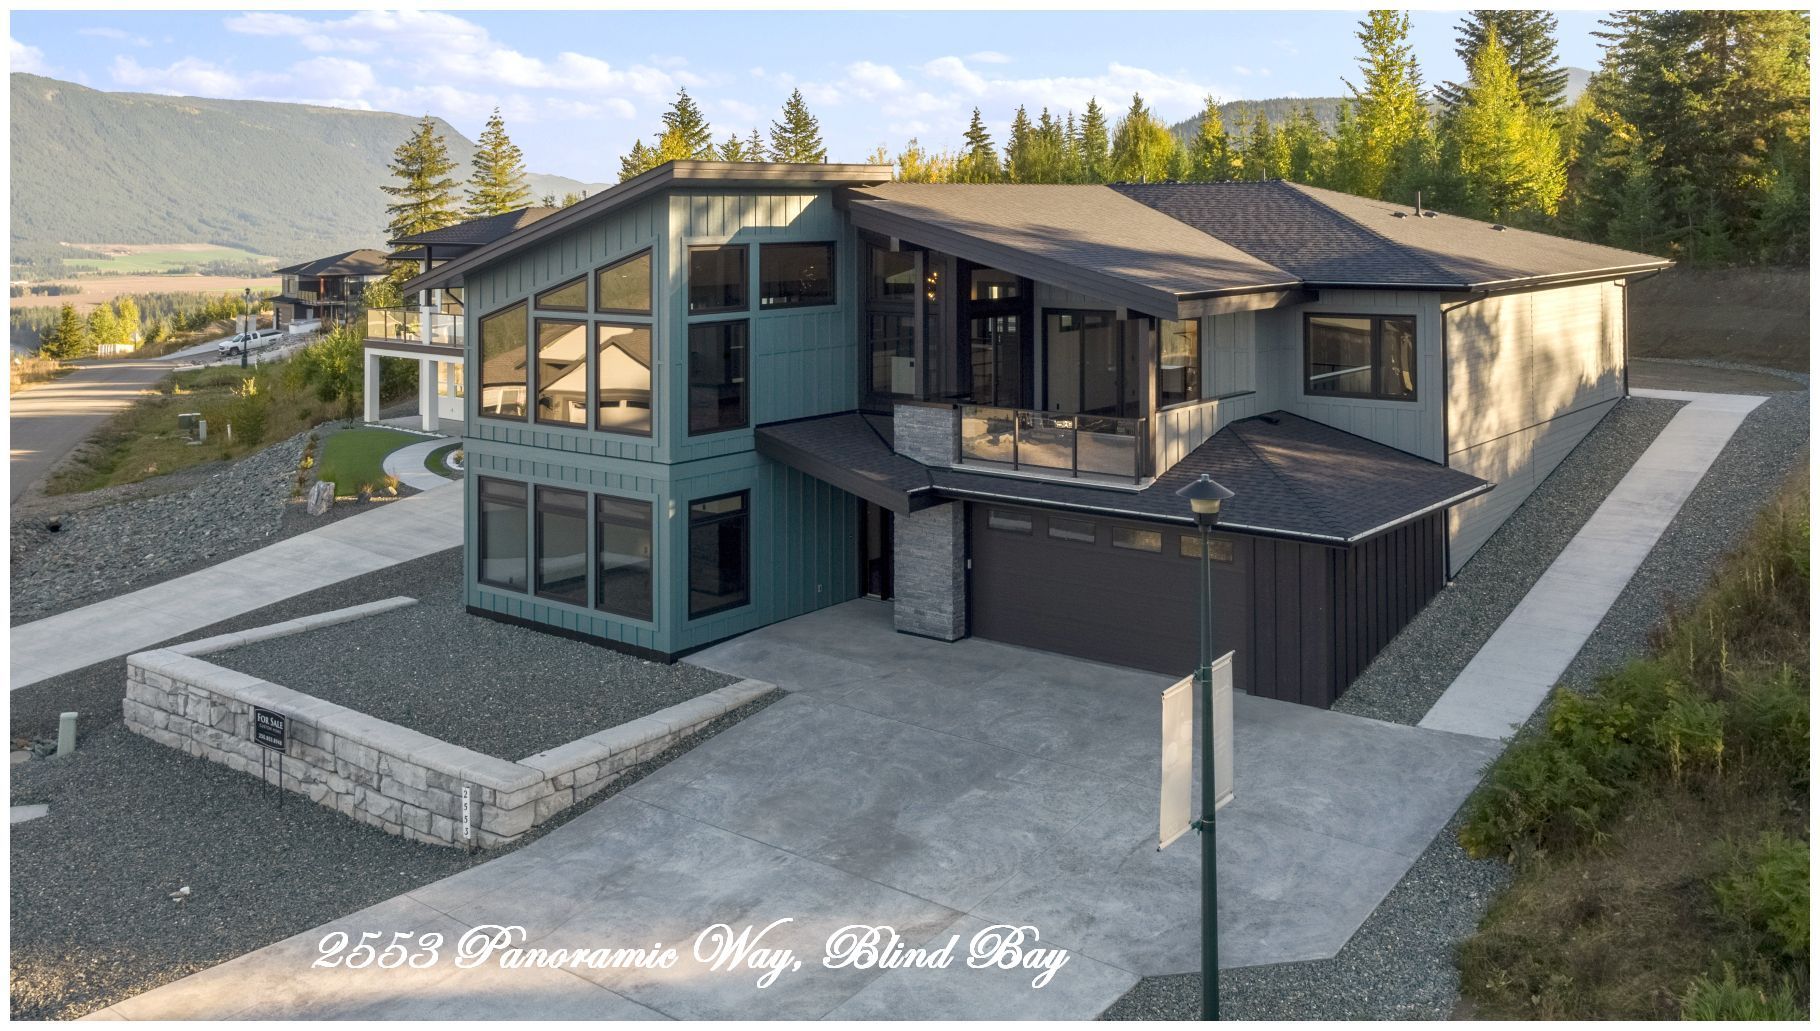 Main Photo: 2553 Panoramic Way in Blind Bay: Highlands House for sale : MLS®# 10217587